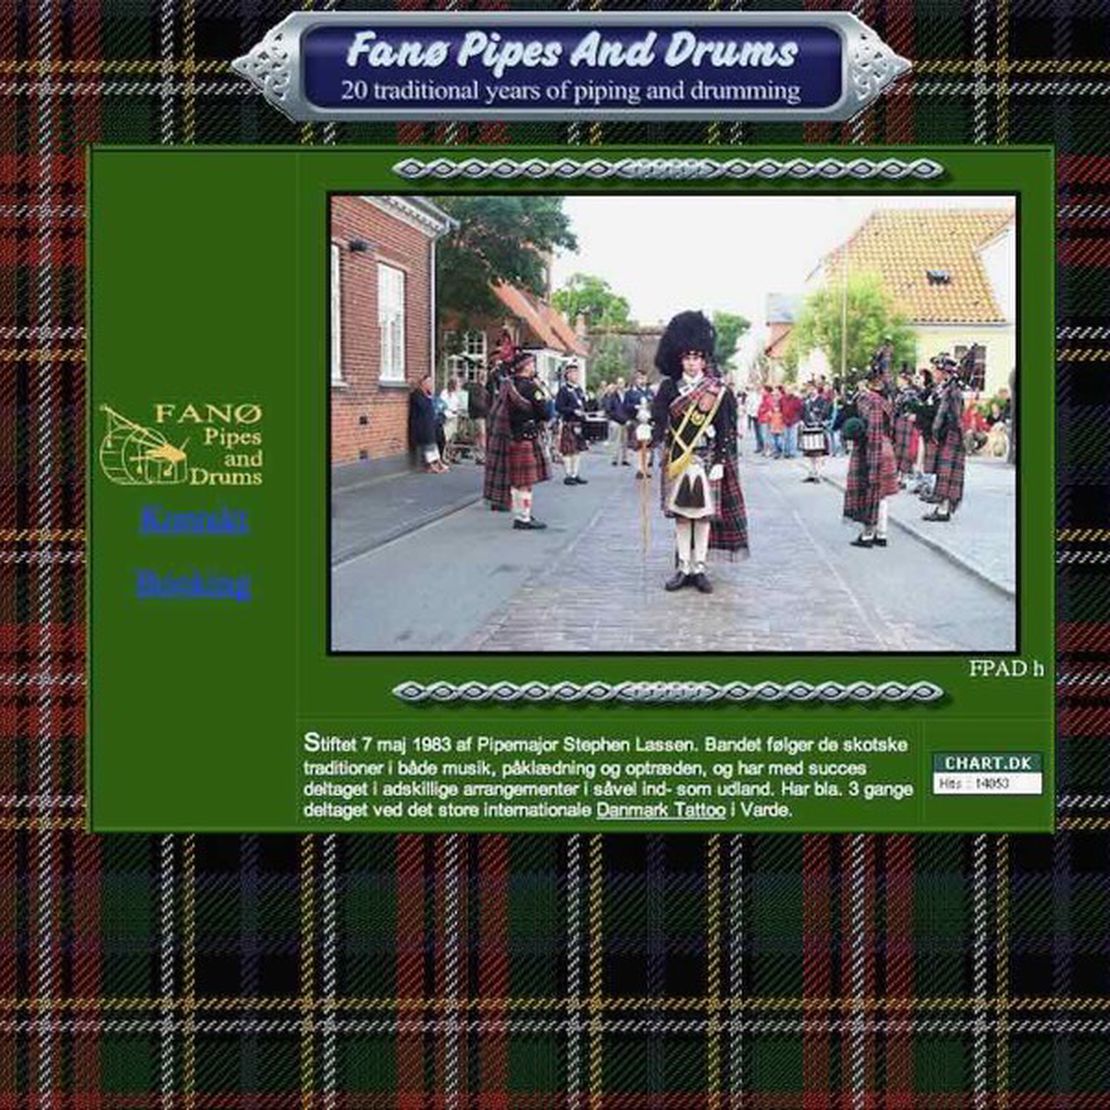 fanoe pipes and drums